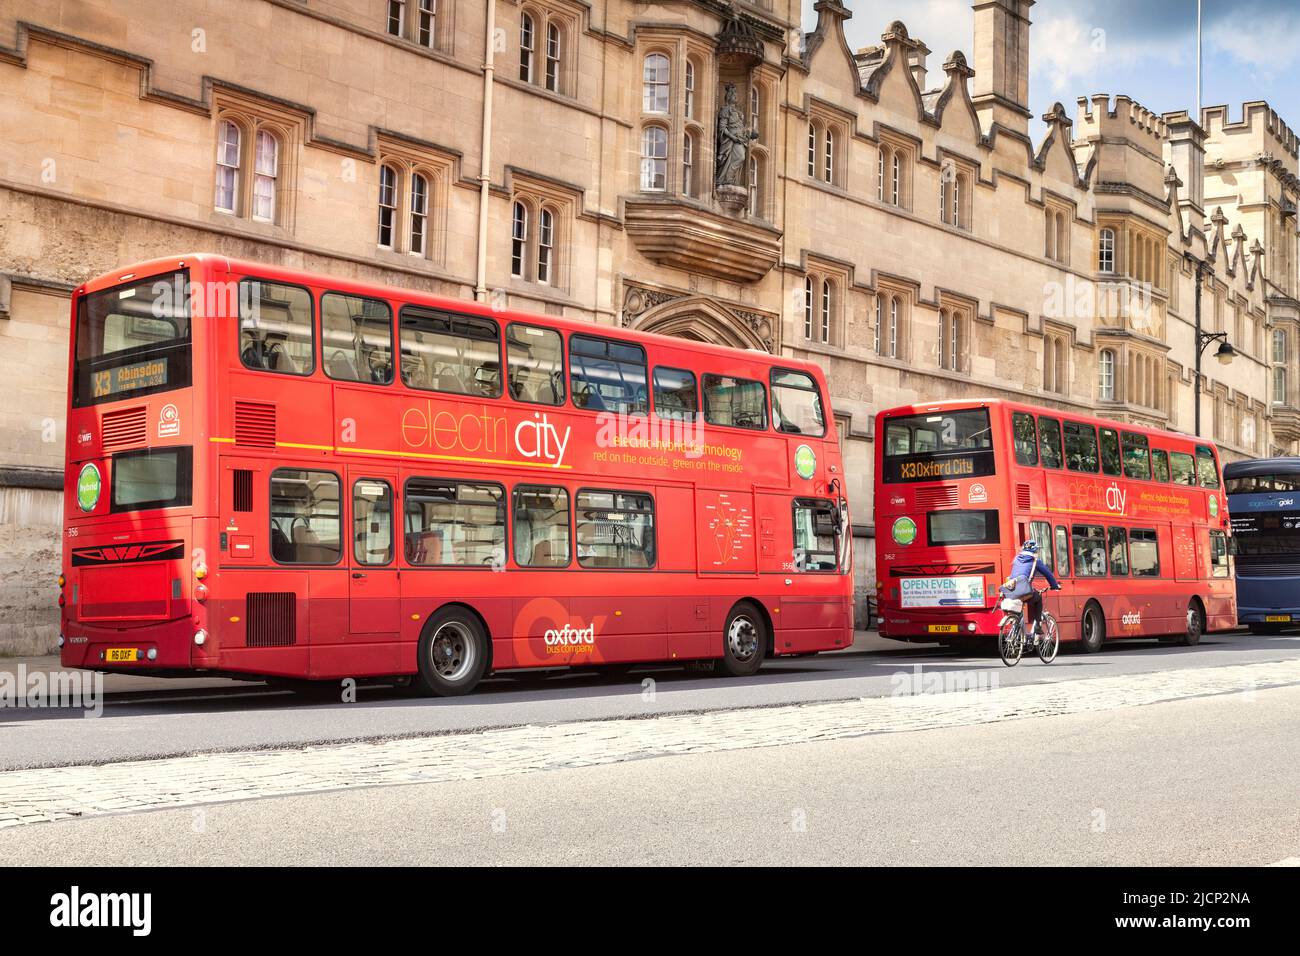 6 June 2019: Oxford, UK - Electric hybrid double decker buses in the High Street, with a cyclist passing by. Stock Photo